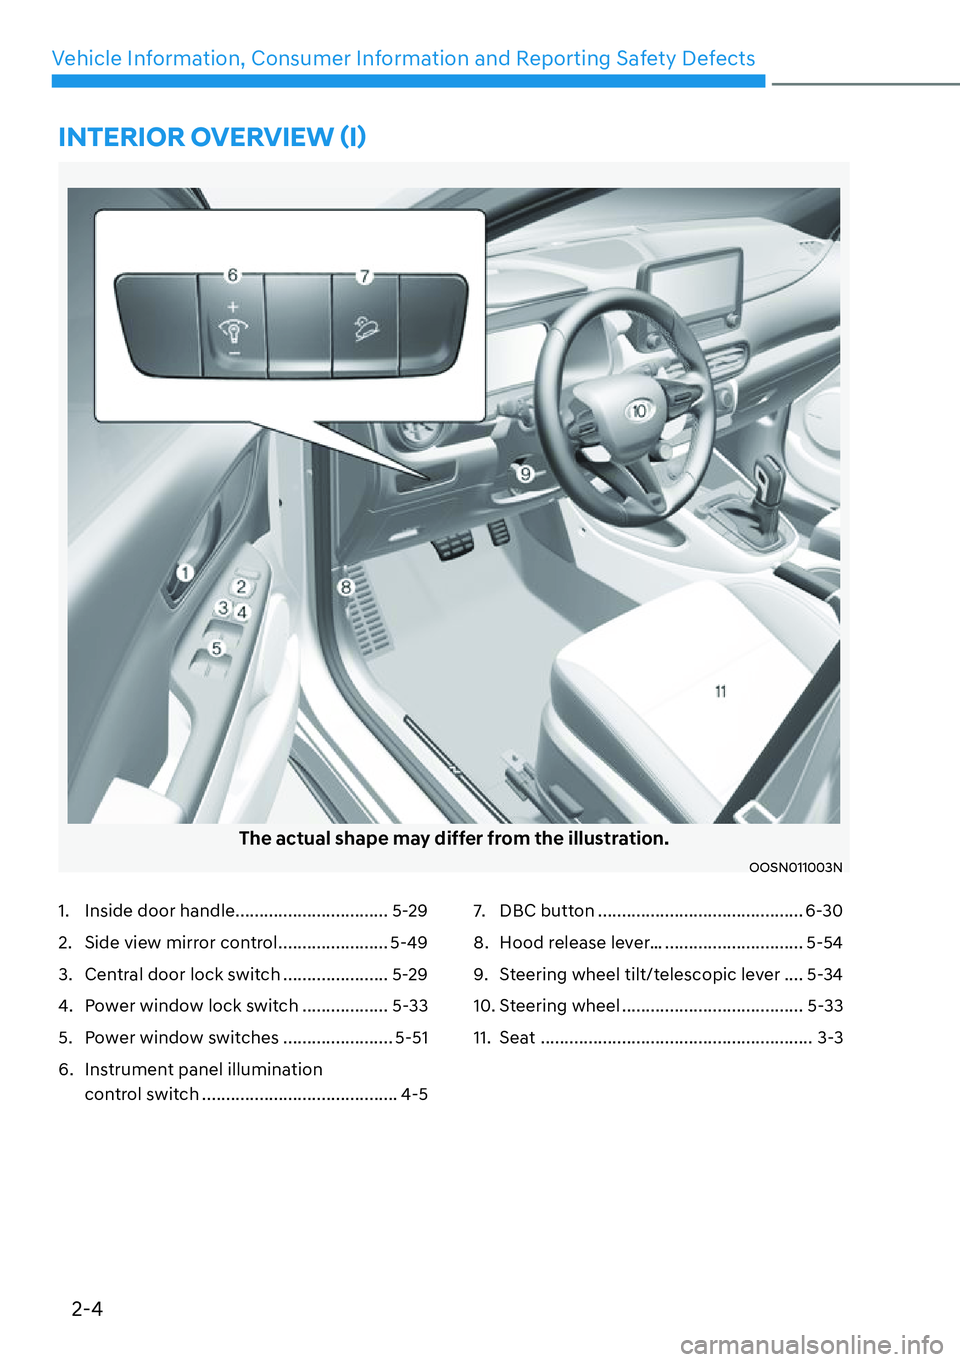 HYUNDAI KONA 2023  Owners Manual 2-4
Vehicle Information, Consumer Information and Reporting Safety Defects
1.  Inside door handle ................................ 5-29
2.  Side view mirror control ....................... 5-49
3.  Ce